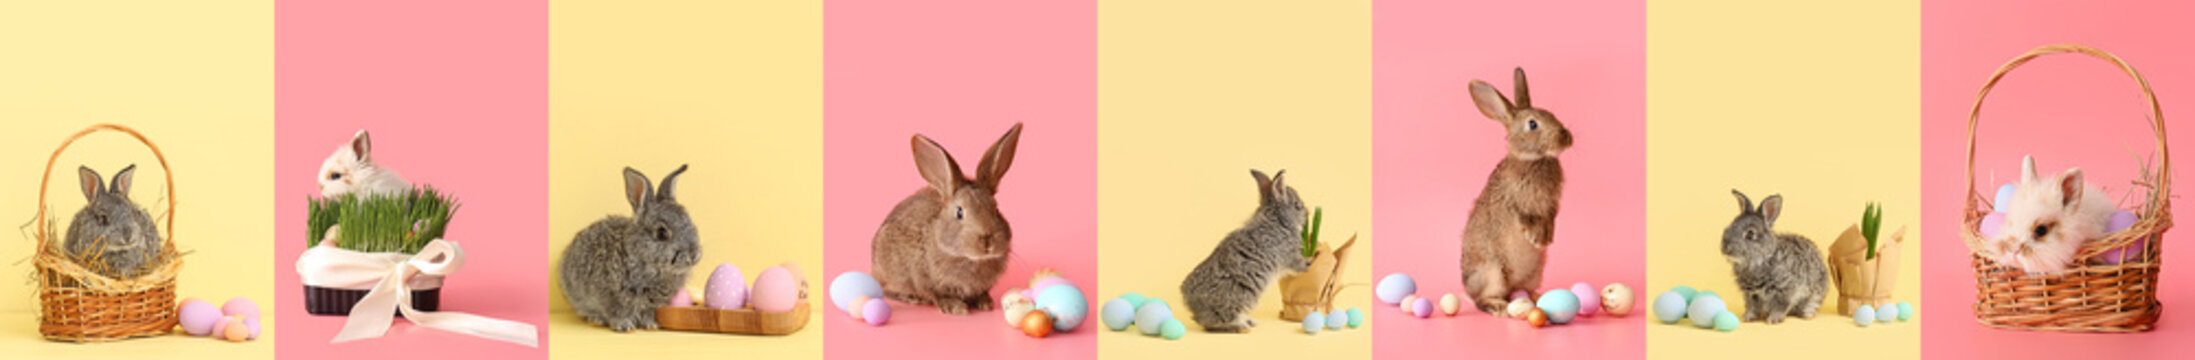 Set with cute bunnies and Easter eggs on color background